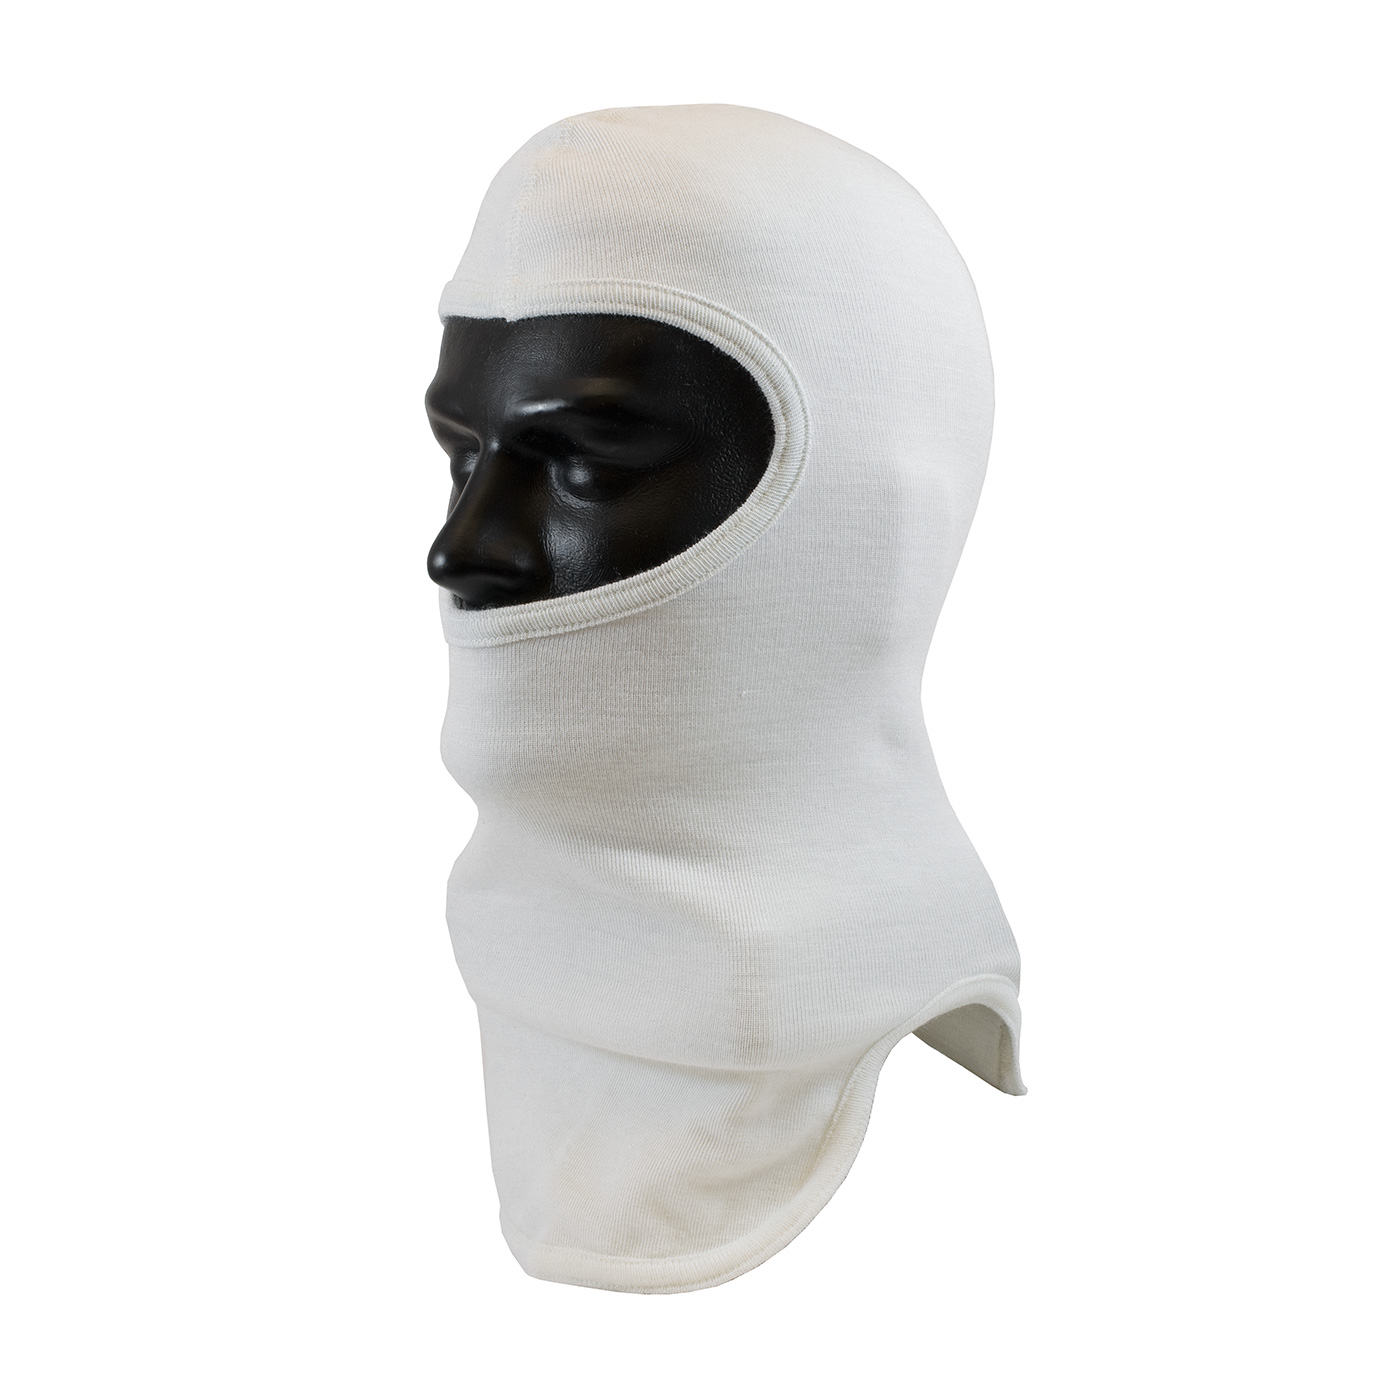 PIP® Double-Layer Tri-Cut White Nomex® Hood - Full Face #906-100NOM7